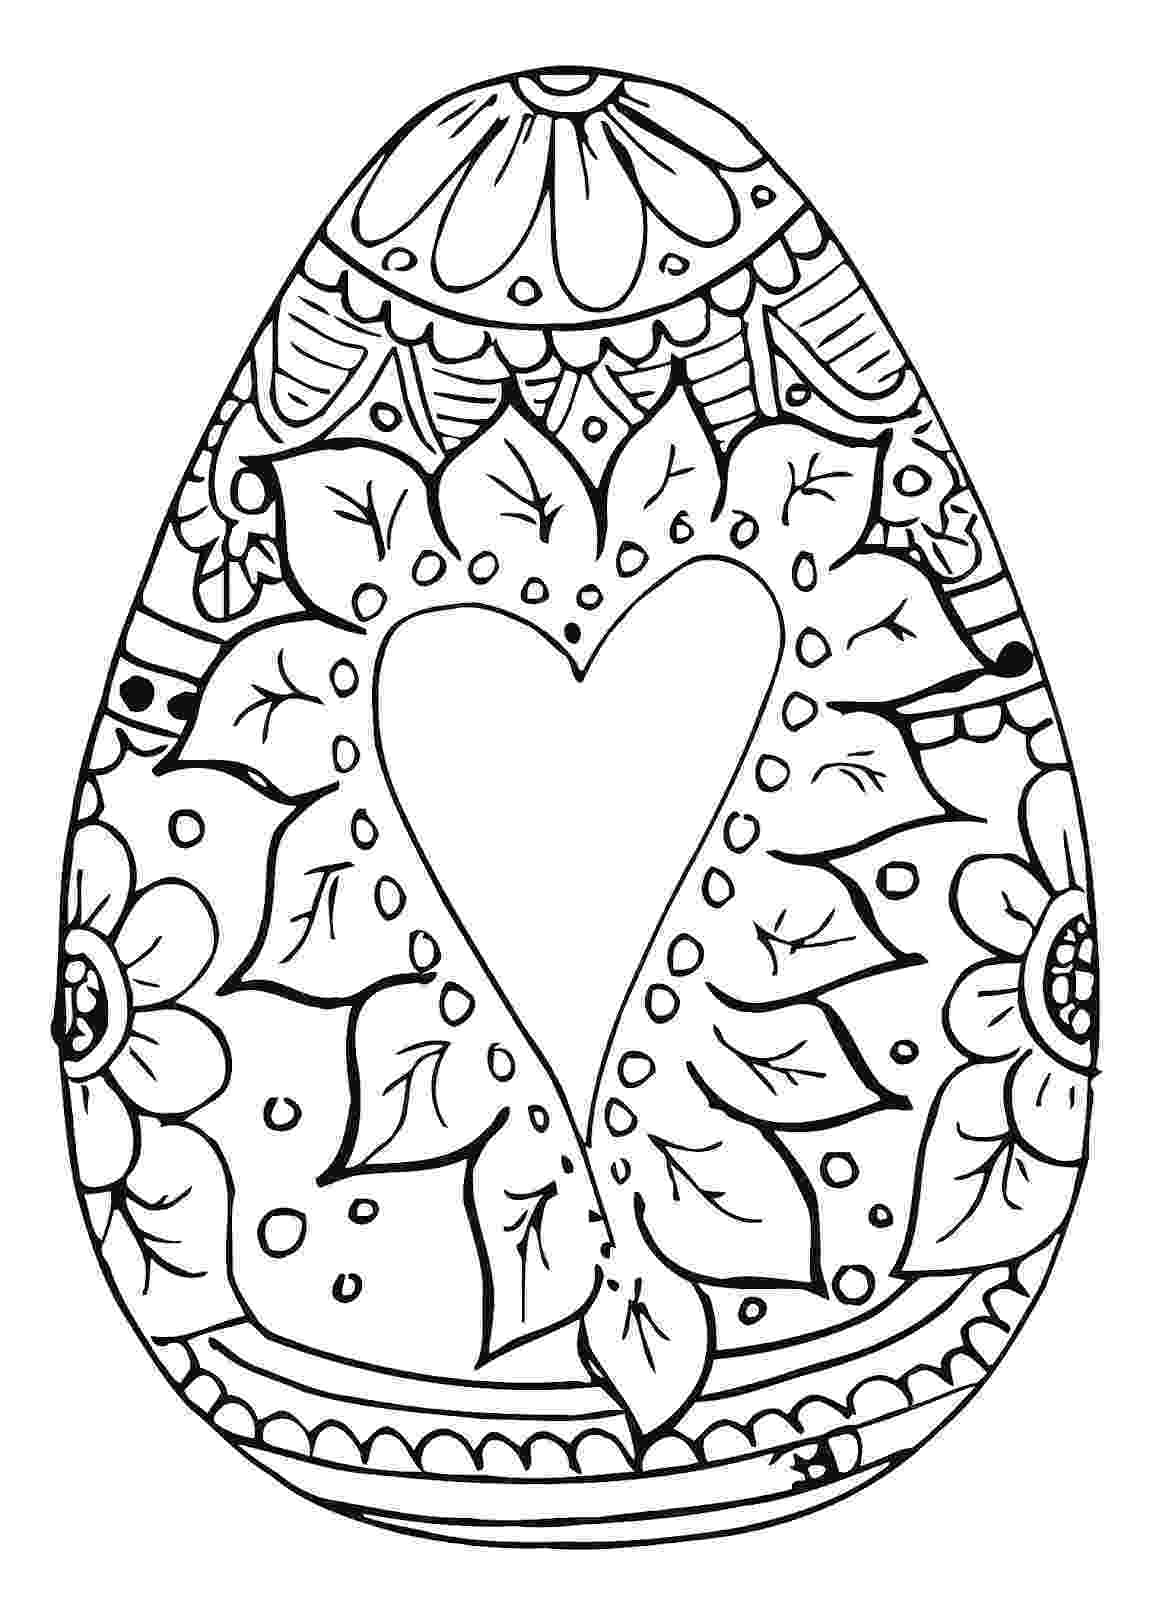 egg coloring pages easter coloring pages for adults best coloring pages for pages egg coloring 